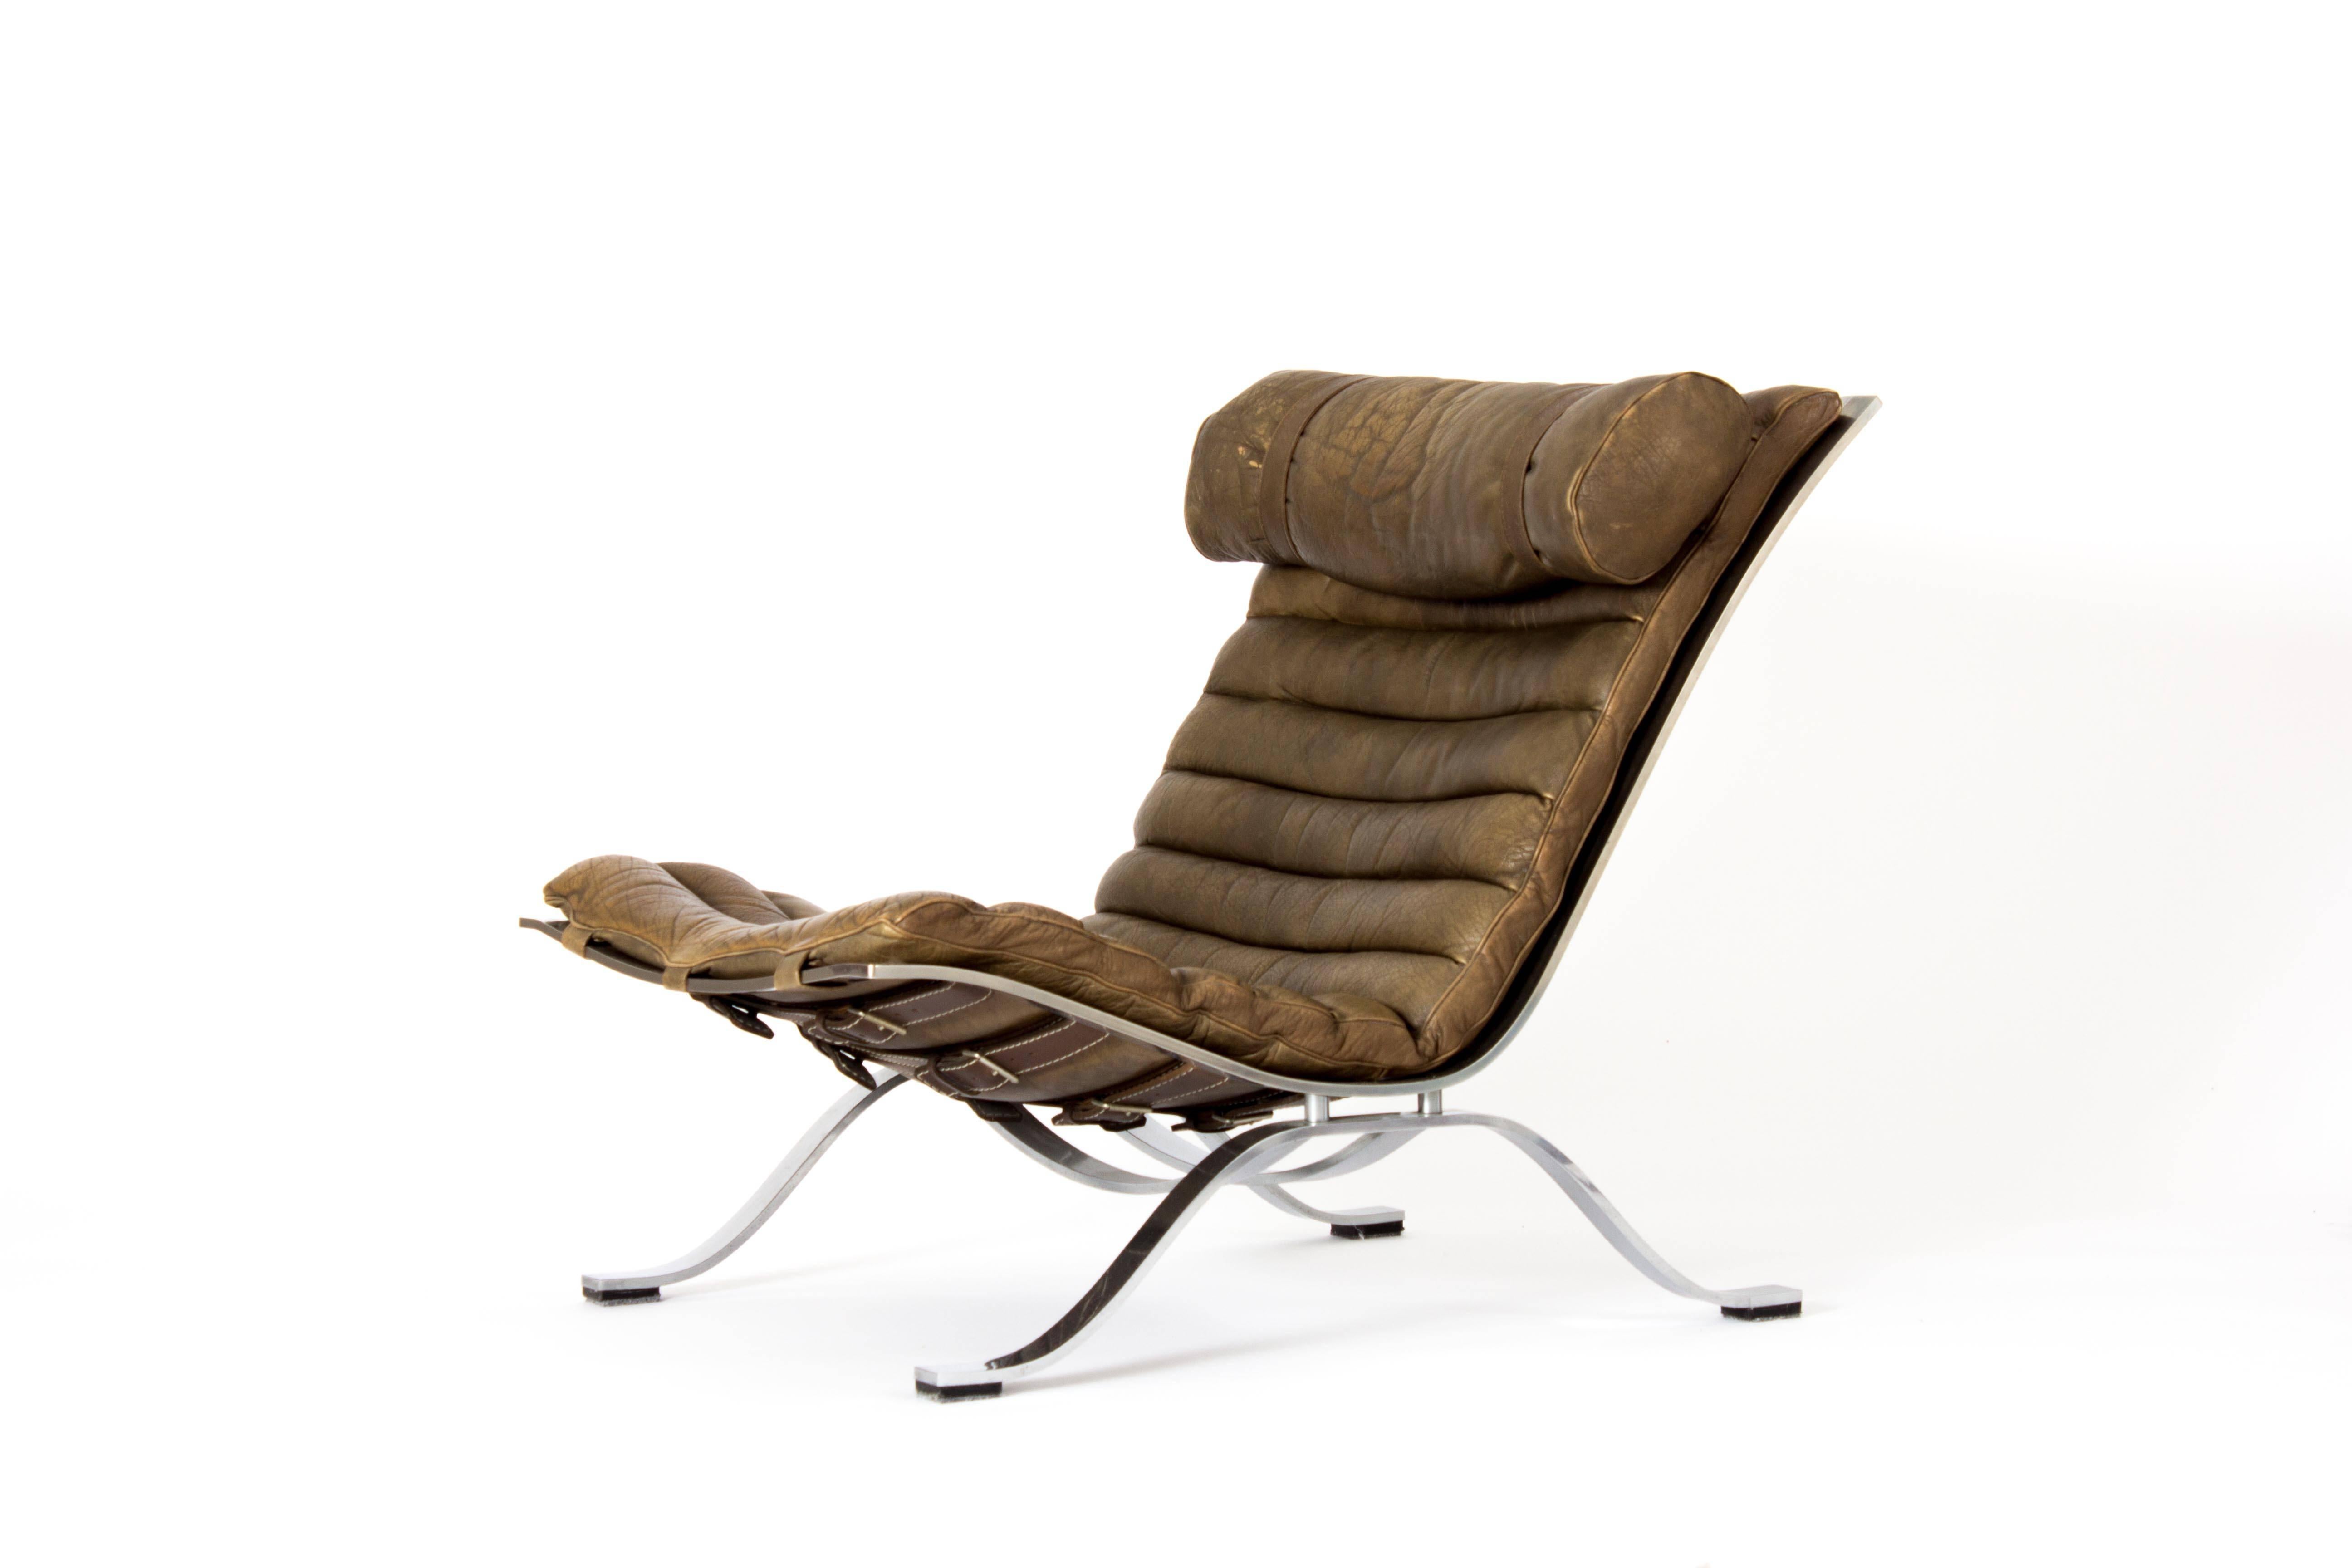 This Ari lounge chair was designed by Arne Norell for Norell Møbel in the 1960s. It has a chromed spring steel frame and seat and back cushions in channel-sewn leather that has aged beautifully, with a patina that is somewhere between brown and